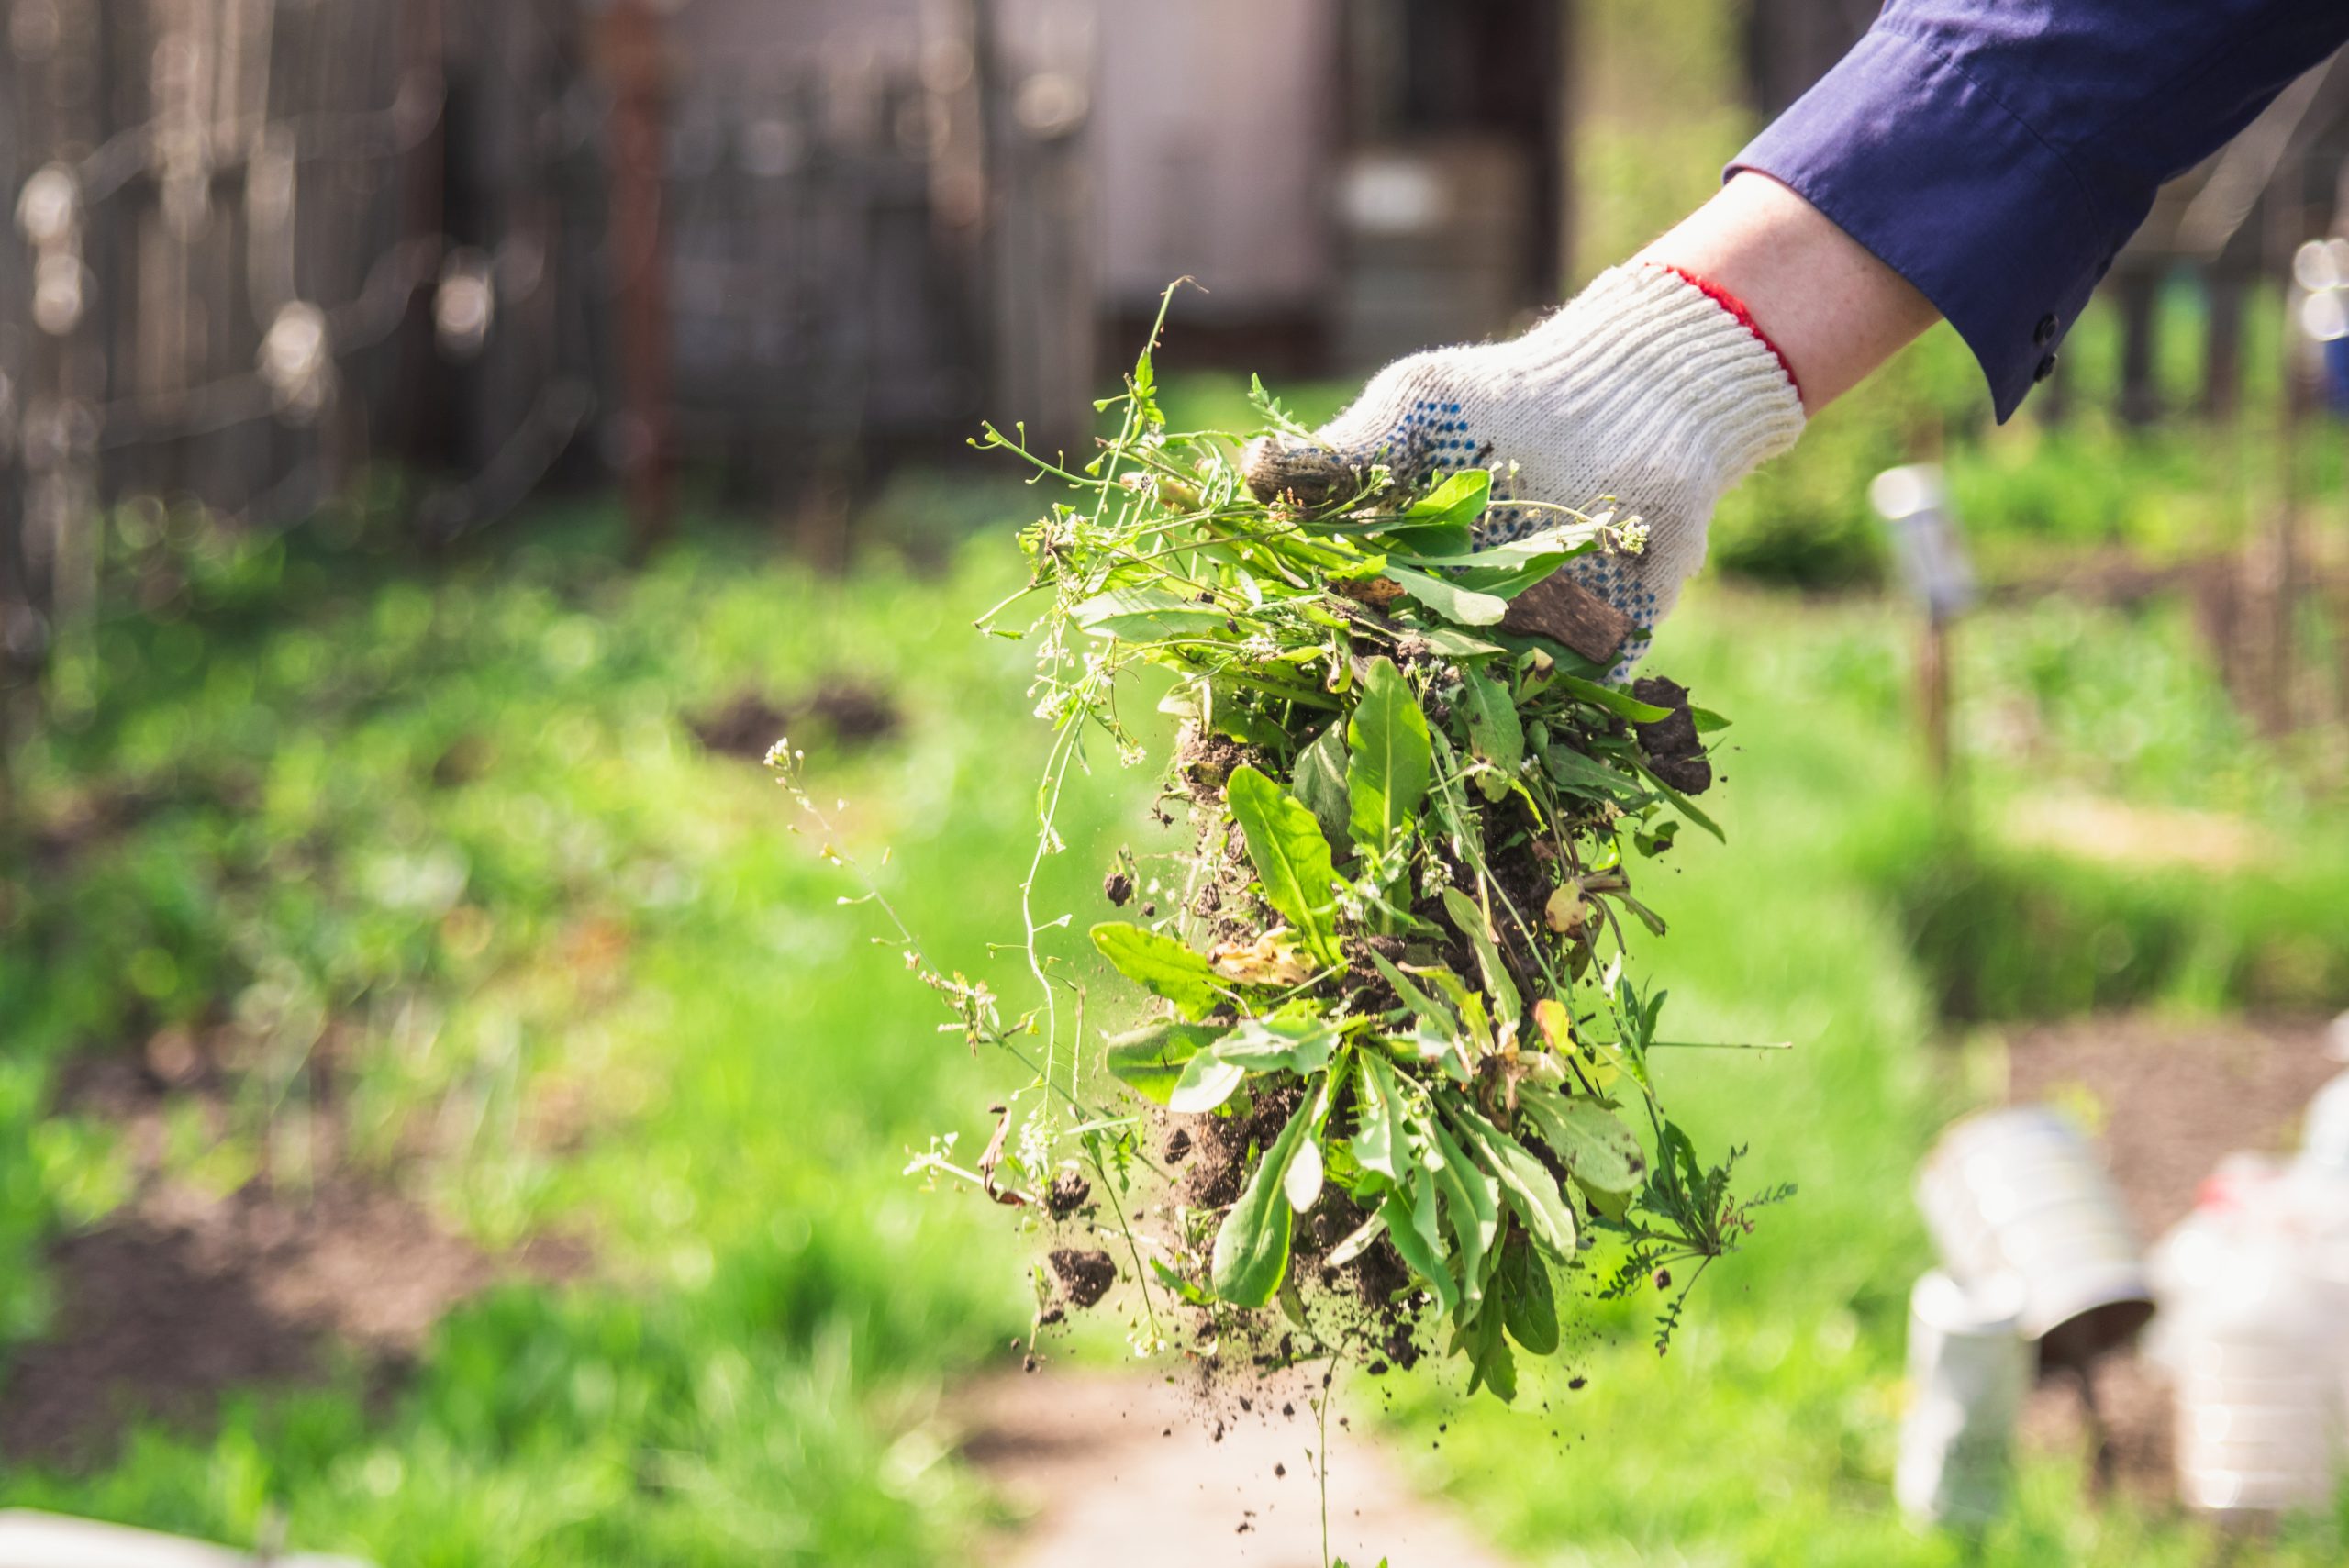 Prevent weeds like a pro landscaper – our 3 tips will stop toxic plants that wreak havoc on your garden